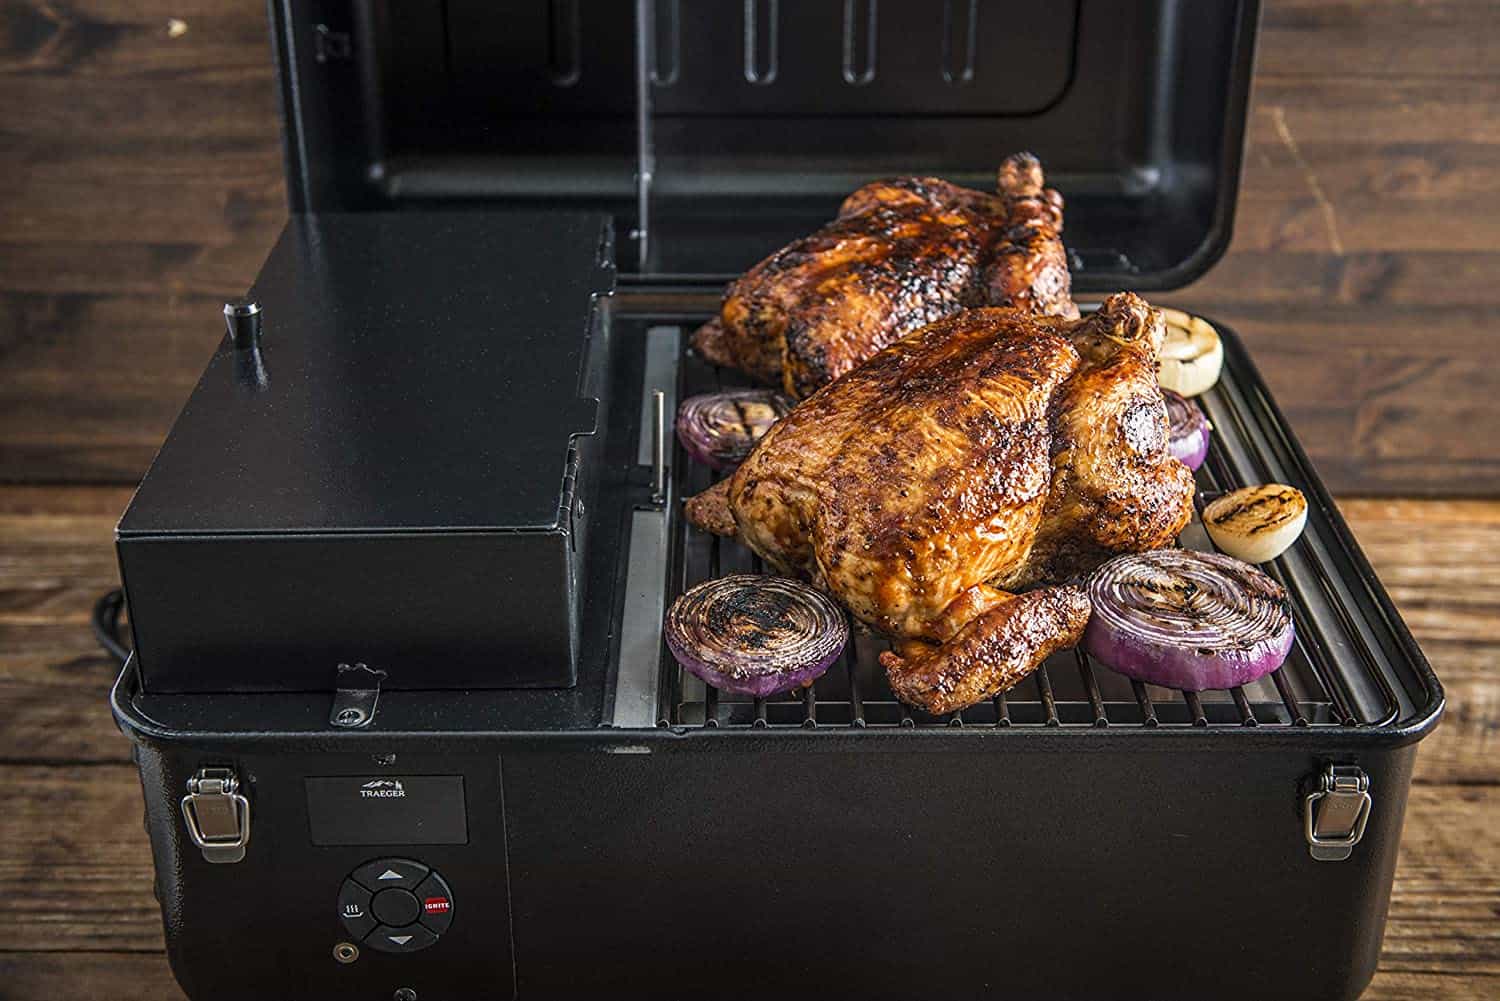 Best Portable Traeger Grill: Ranger Grill Portable Grill and Smoker